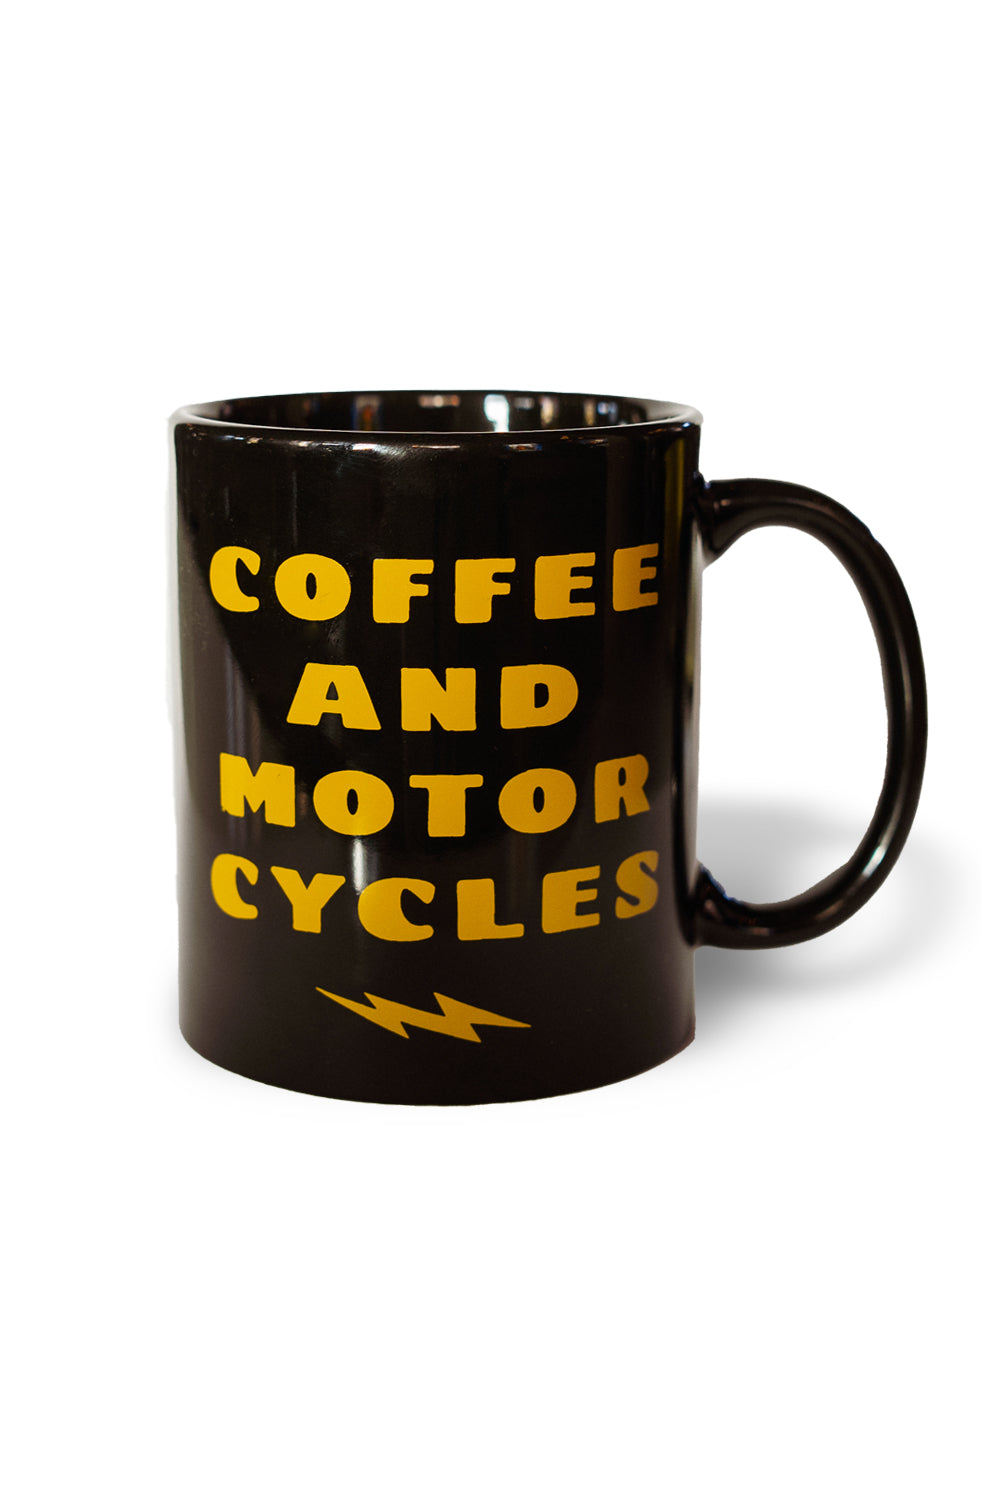 https://cdn.shopify.com/s/files/1/0513/0725/products/1.brother-moto-coffee-and-motor-cycles-motorcycles-mug-black-gold.jpg?v=1614382050